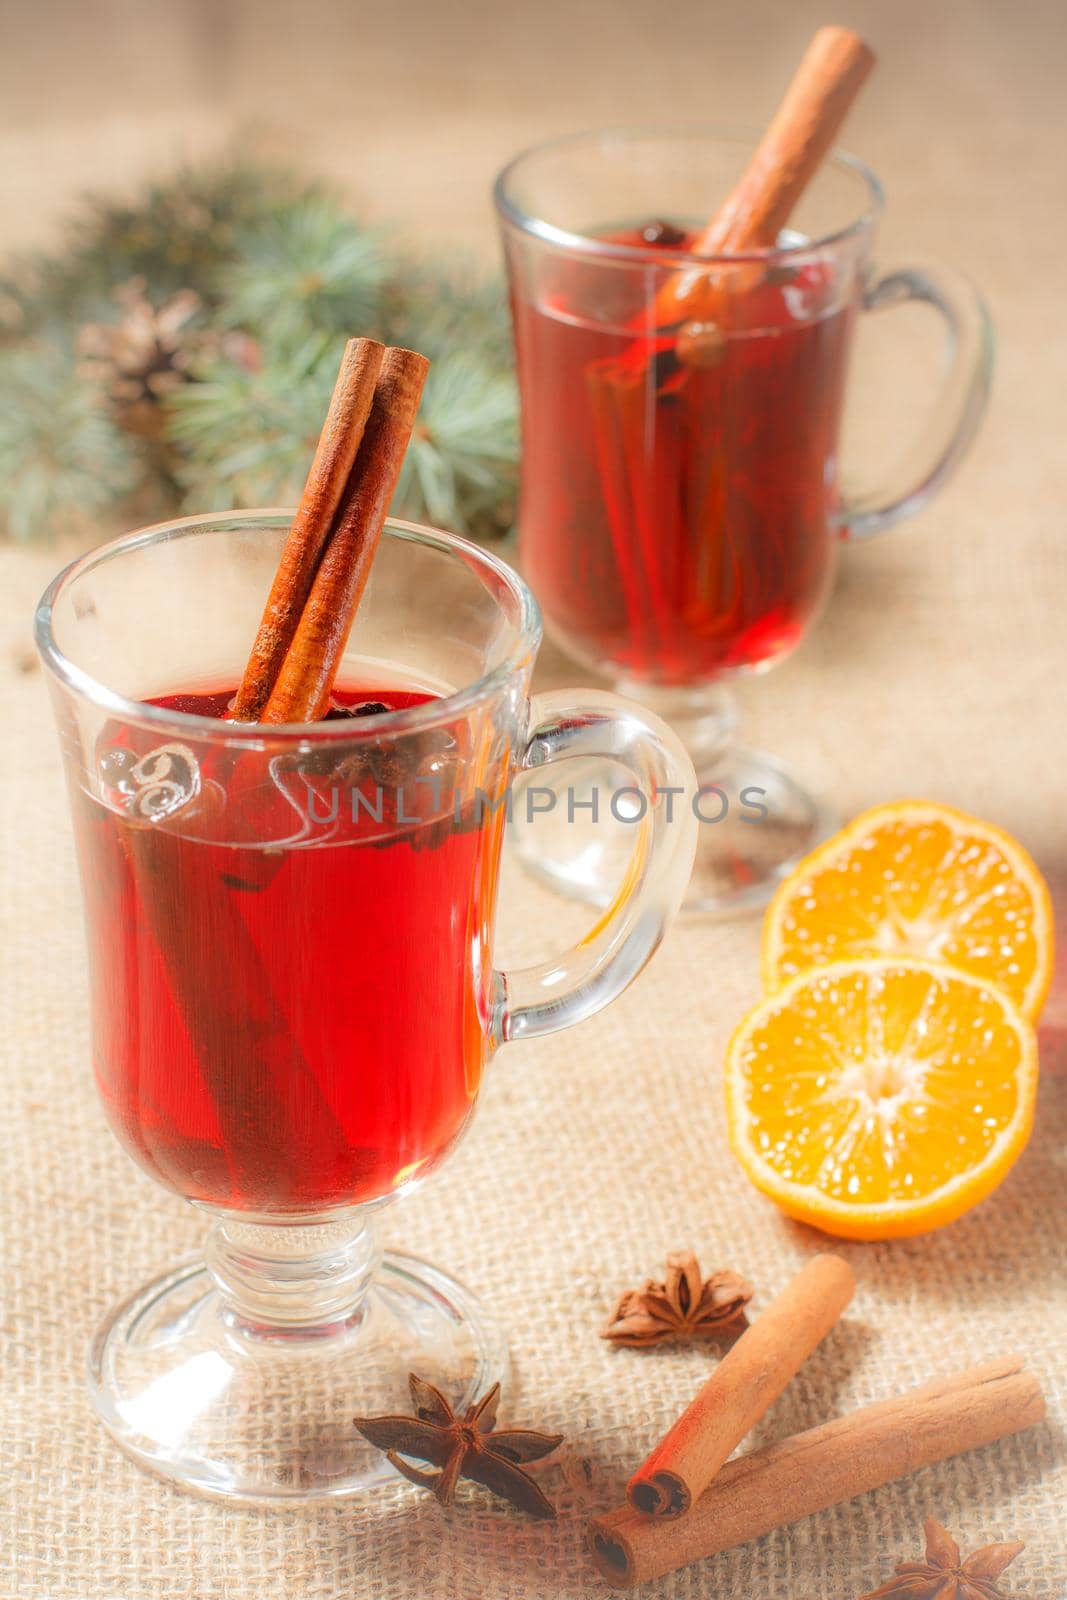 Glass of Christmas mulled wine with cinnamon, star anise and cloves on sackcloth with slices of orange, natural fir tree branches and cones. Color toning effect.